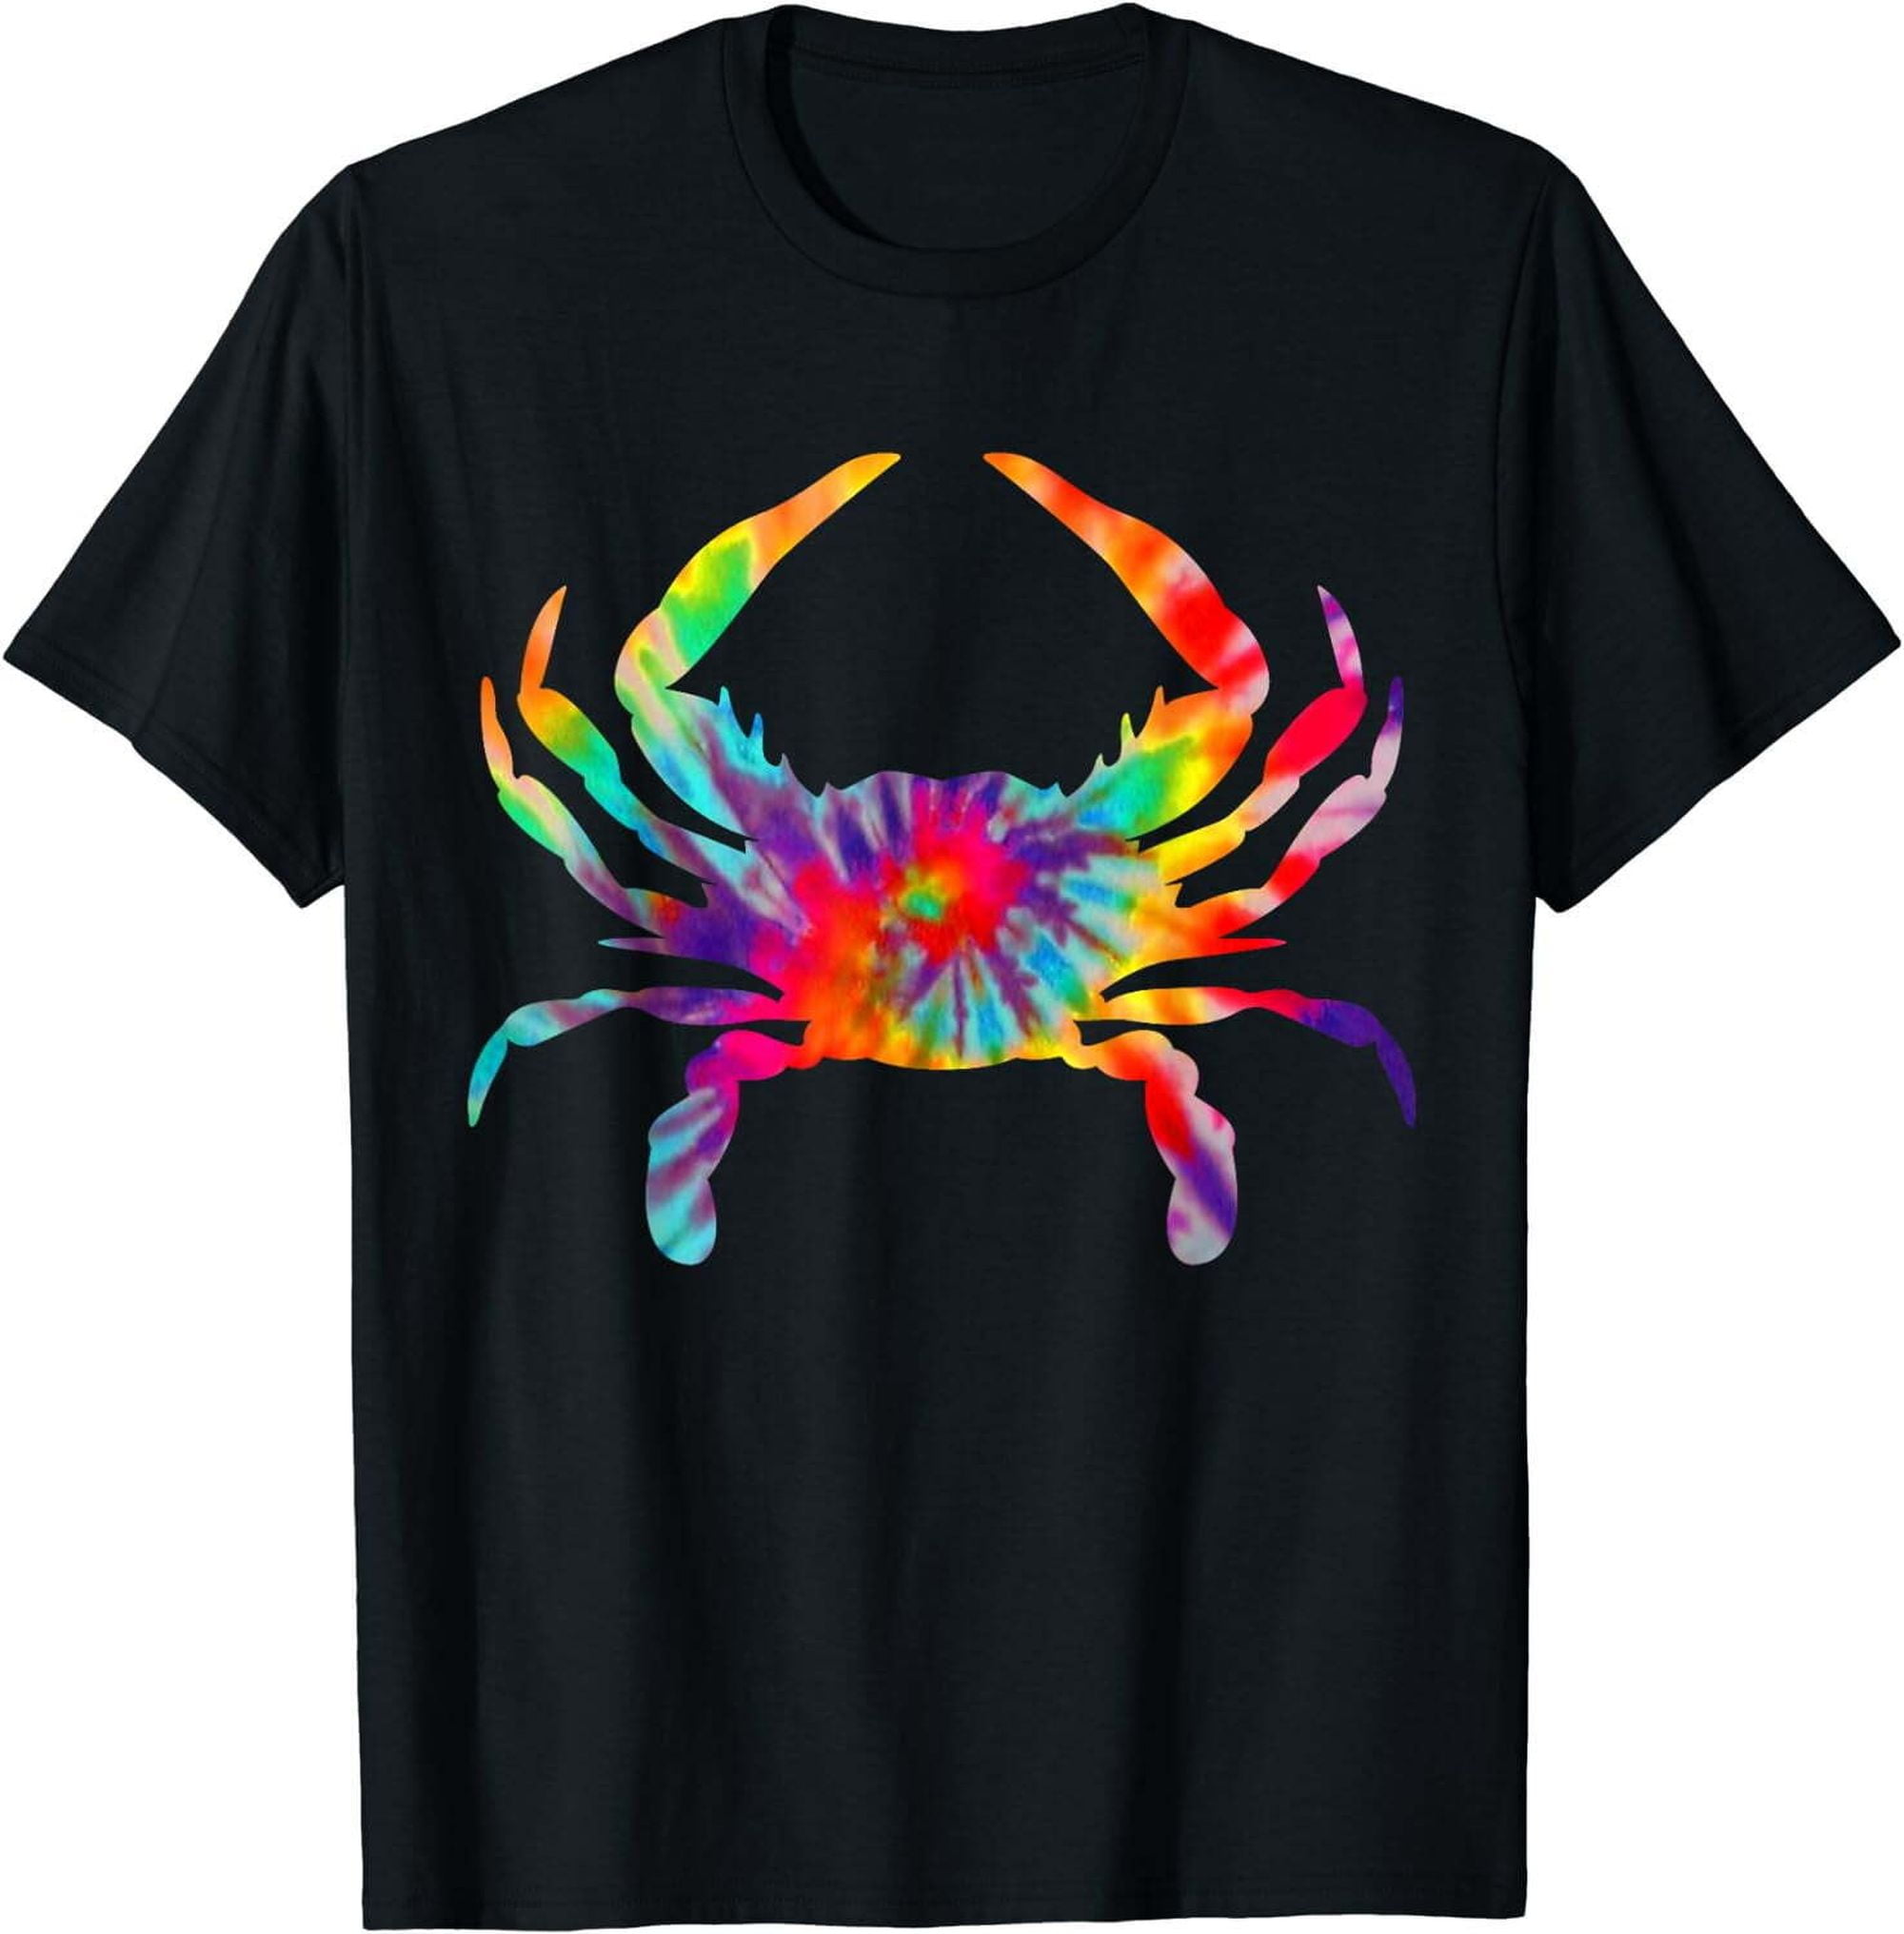 Seaside Serenity: Dive into Relaxation with the Crab Tie Dye Tee ...